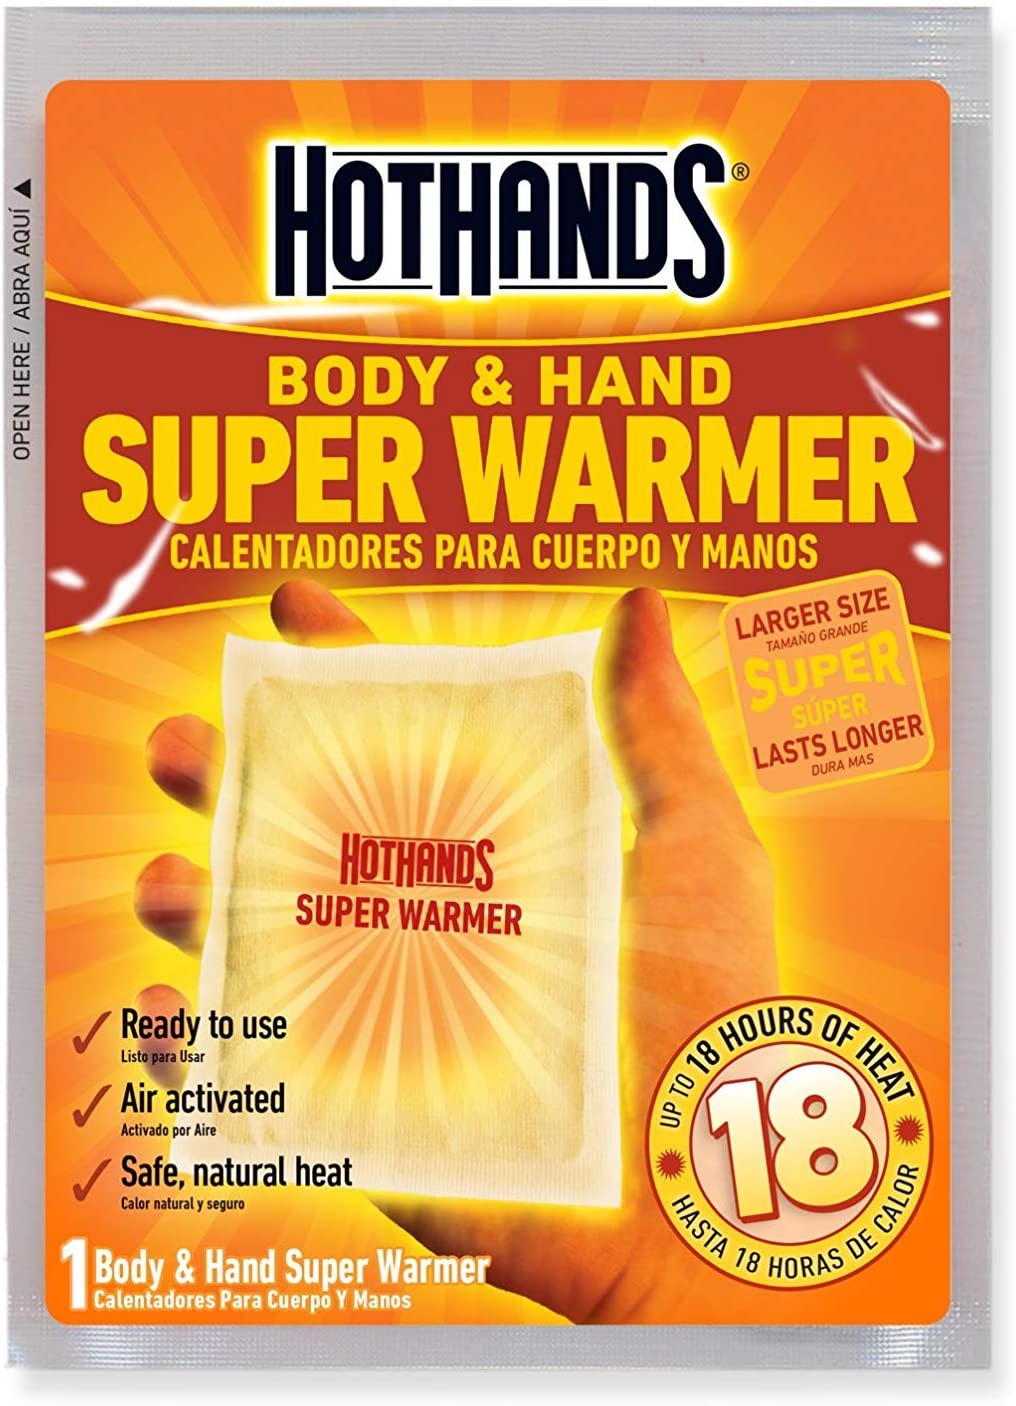 HotHands warmers.